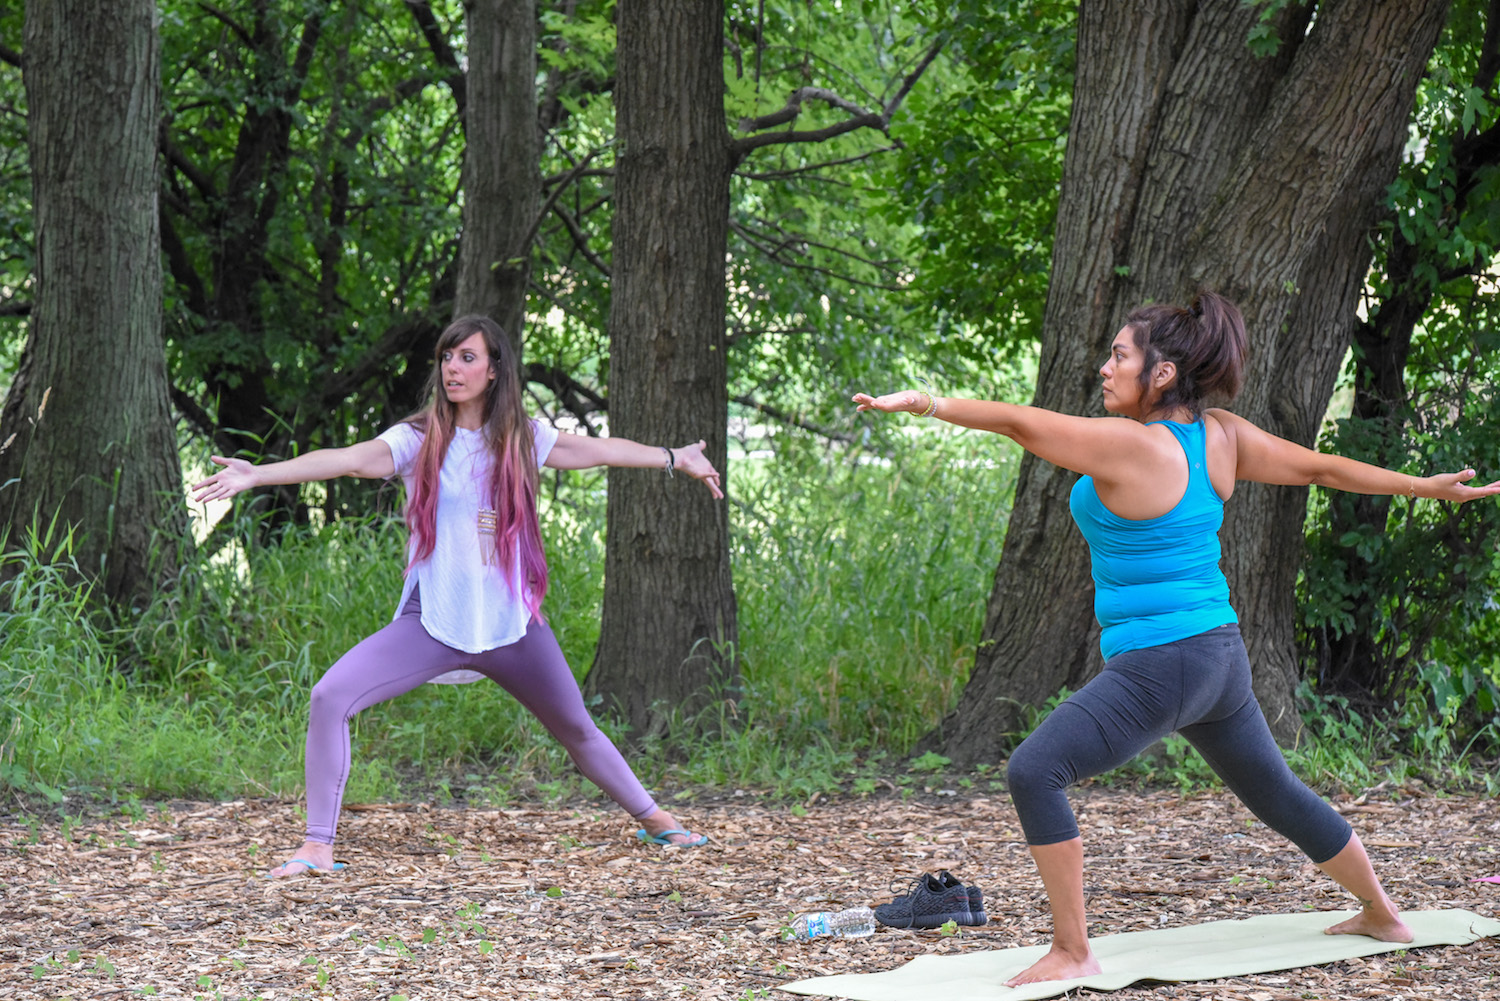 Two people doing yoga outdoors surrounded by big trees.